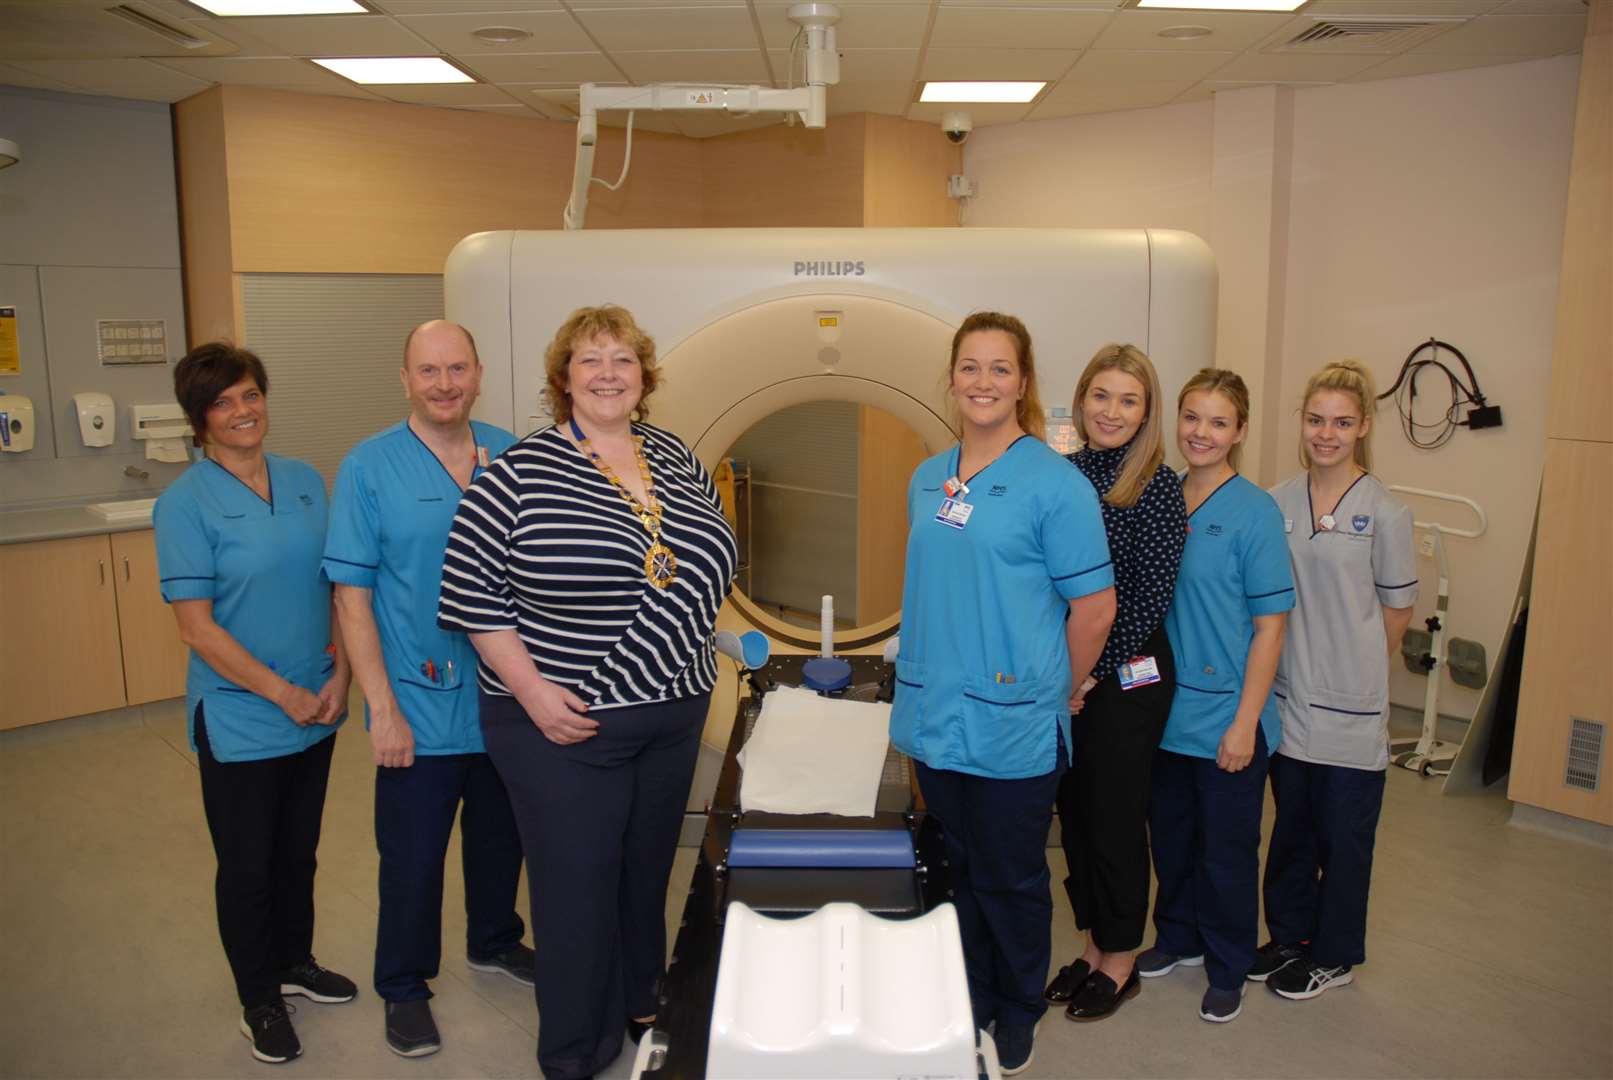 President of the Society of Radiographers Gill Hodges (third left) meets members of the radiotherapy department at the hospital.